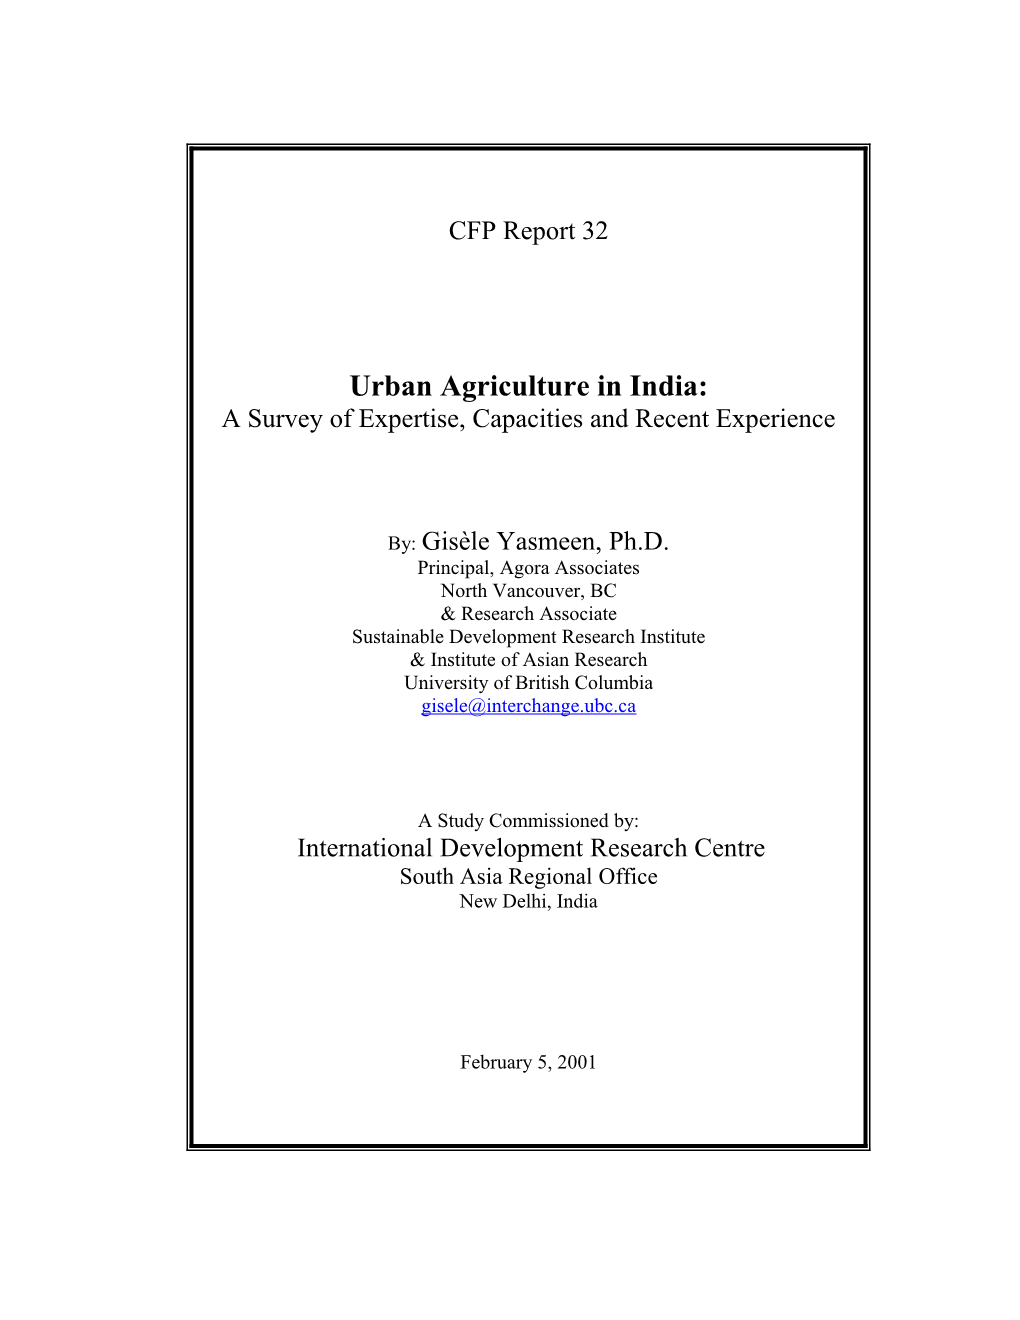 Urban Agriculture in India